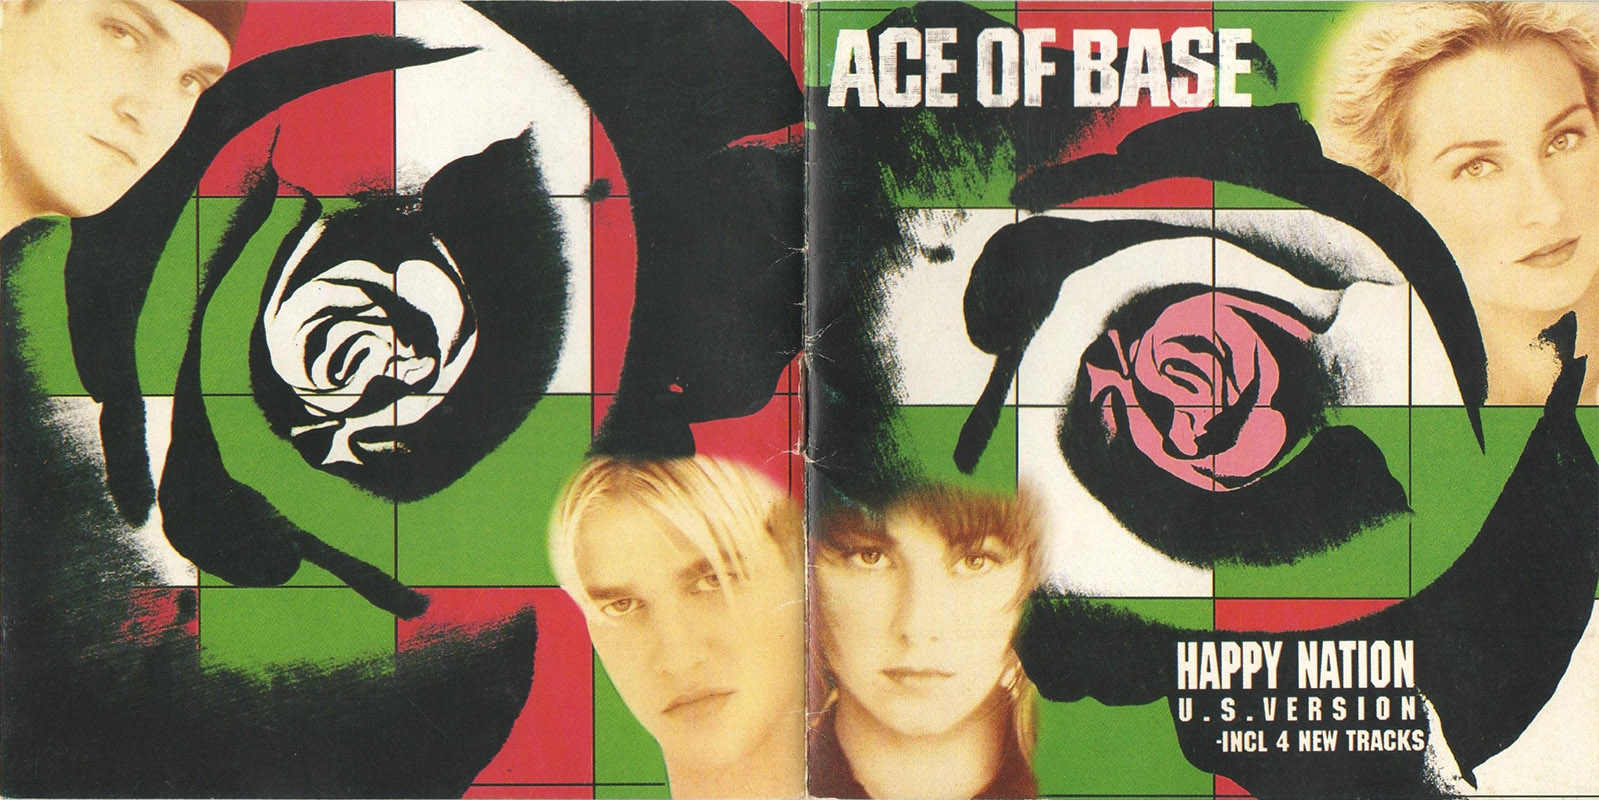 Happy nation смысл. Ace of Base 1992. Ace of Base the sign 1993. Ace of Base 1993 Happy Nation. Ace of Base Happy Nation обложка.